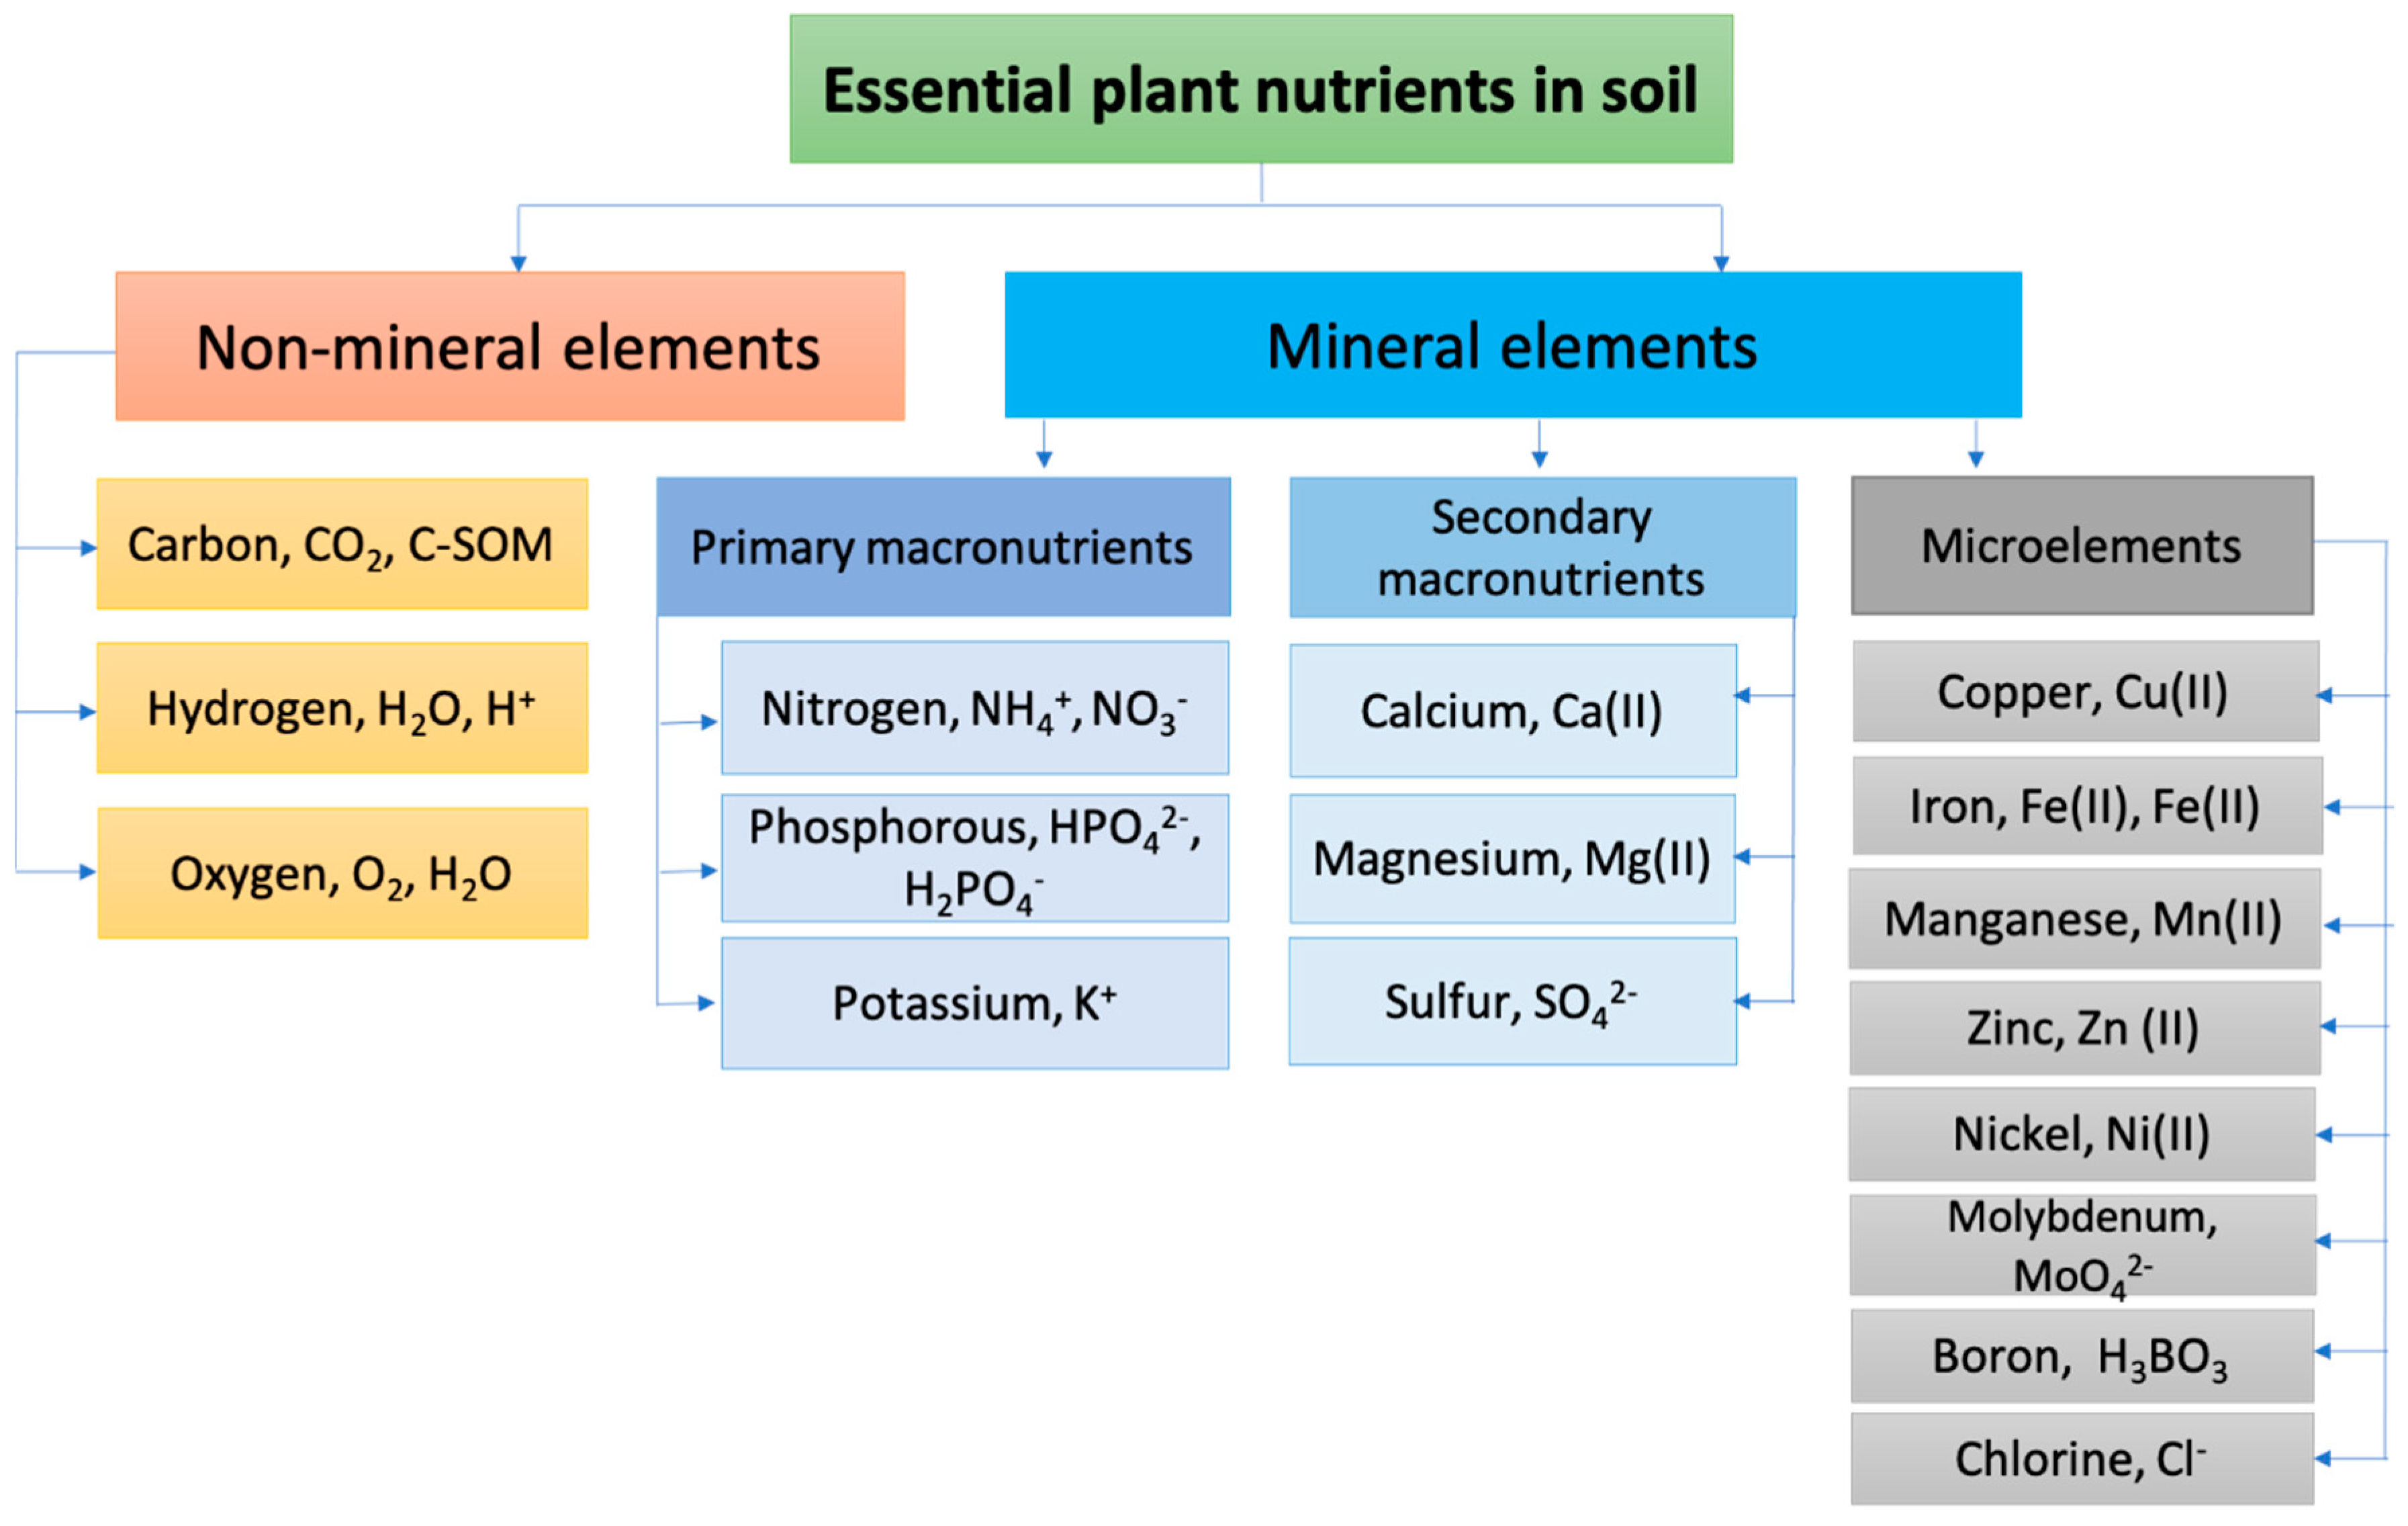 Analyzed content of crude nutrients and selected AAs of